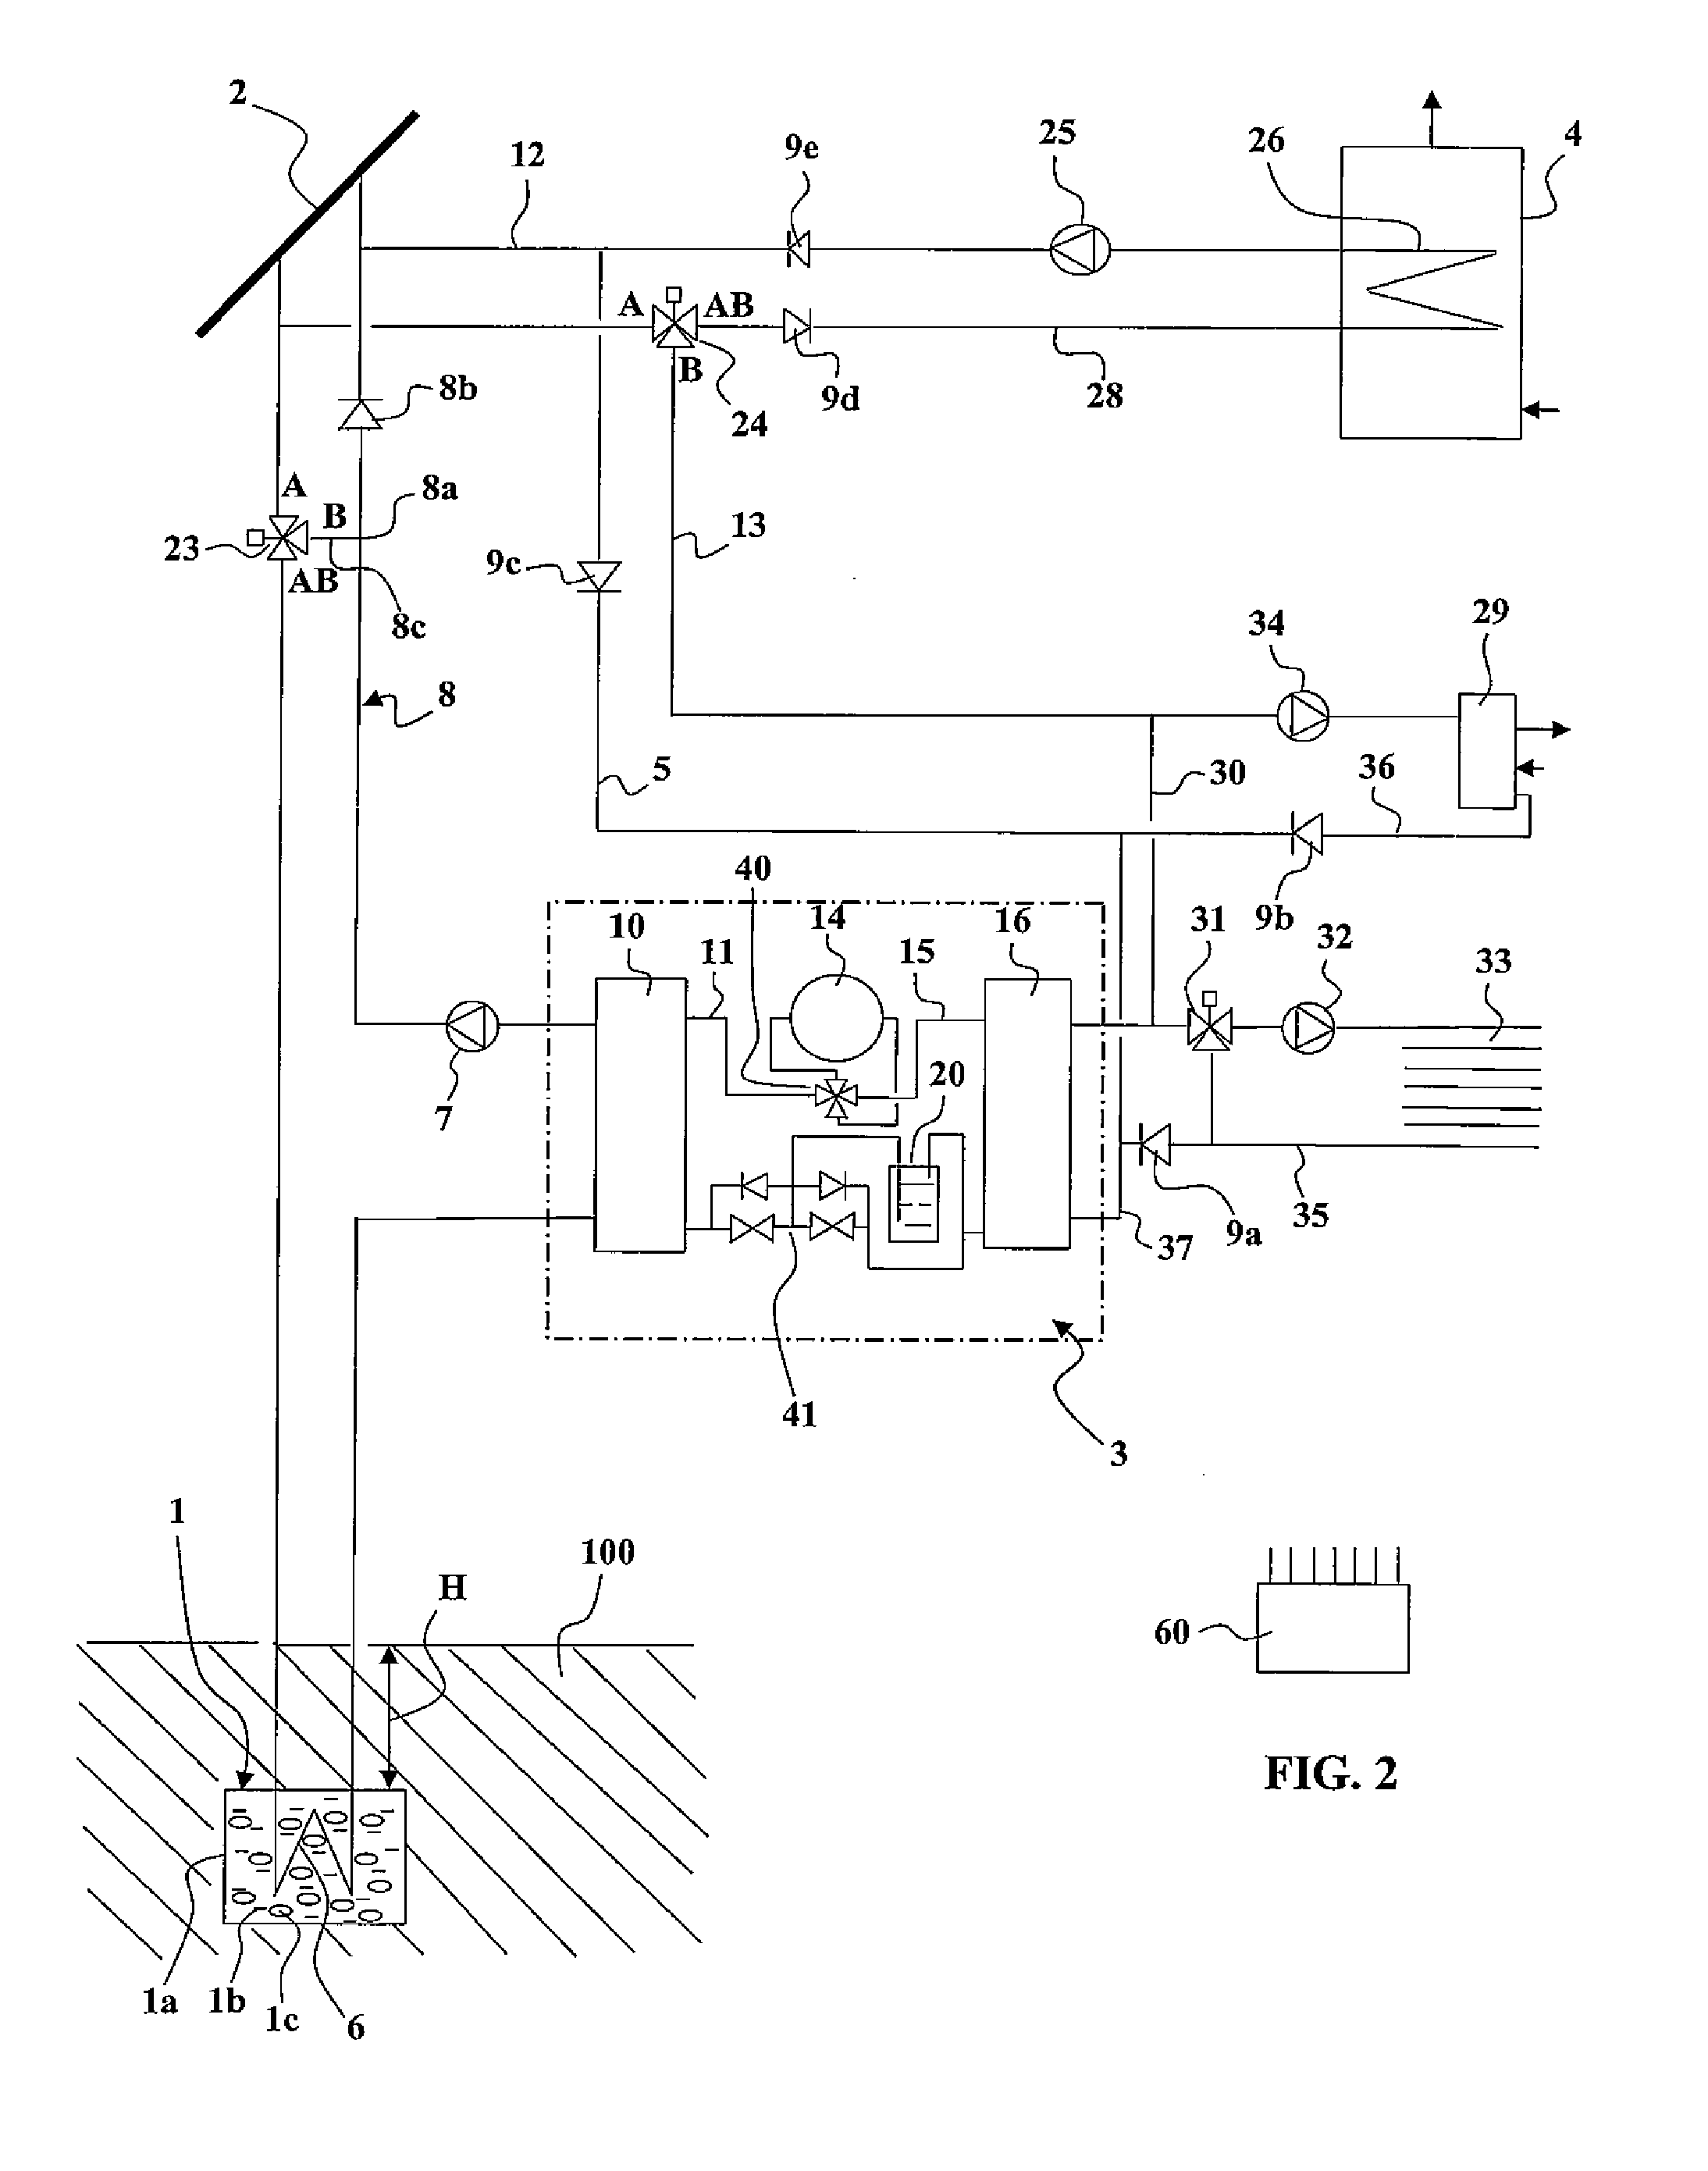 Device for heating, cooling and producing domestic hot water using a heat pump and low-temperature heat store